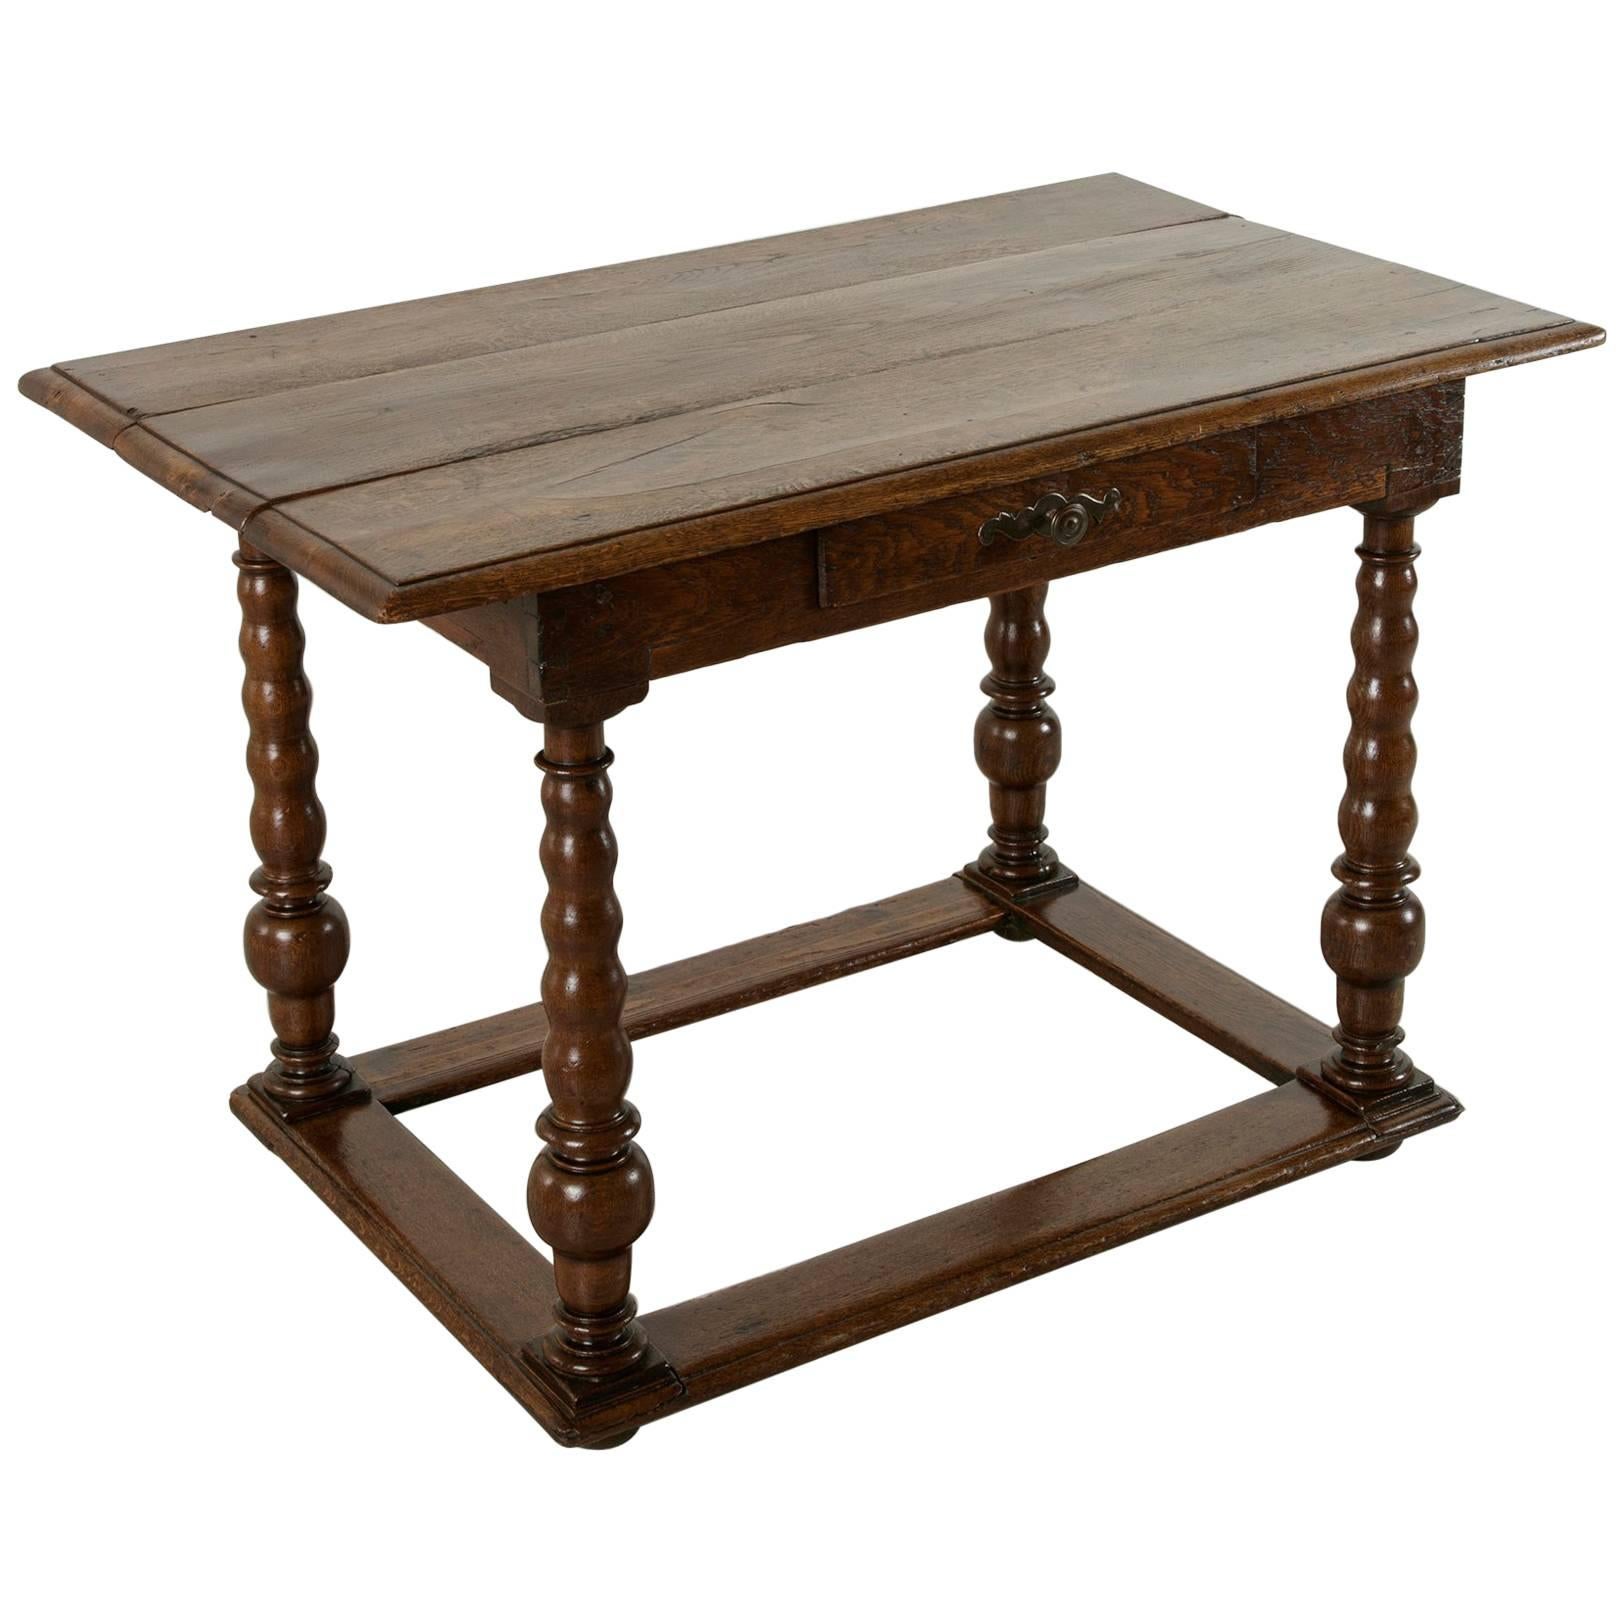 17th Century Louis XIII Period Oak Table with Spooled Legs and Single Drawer